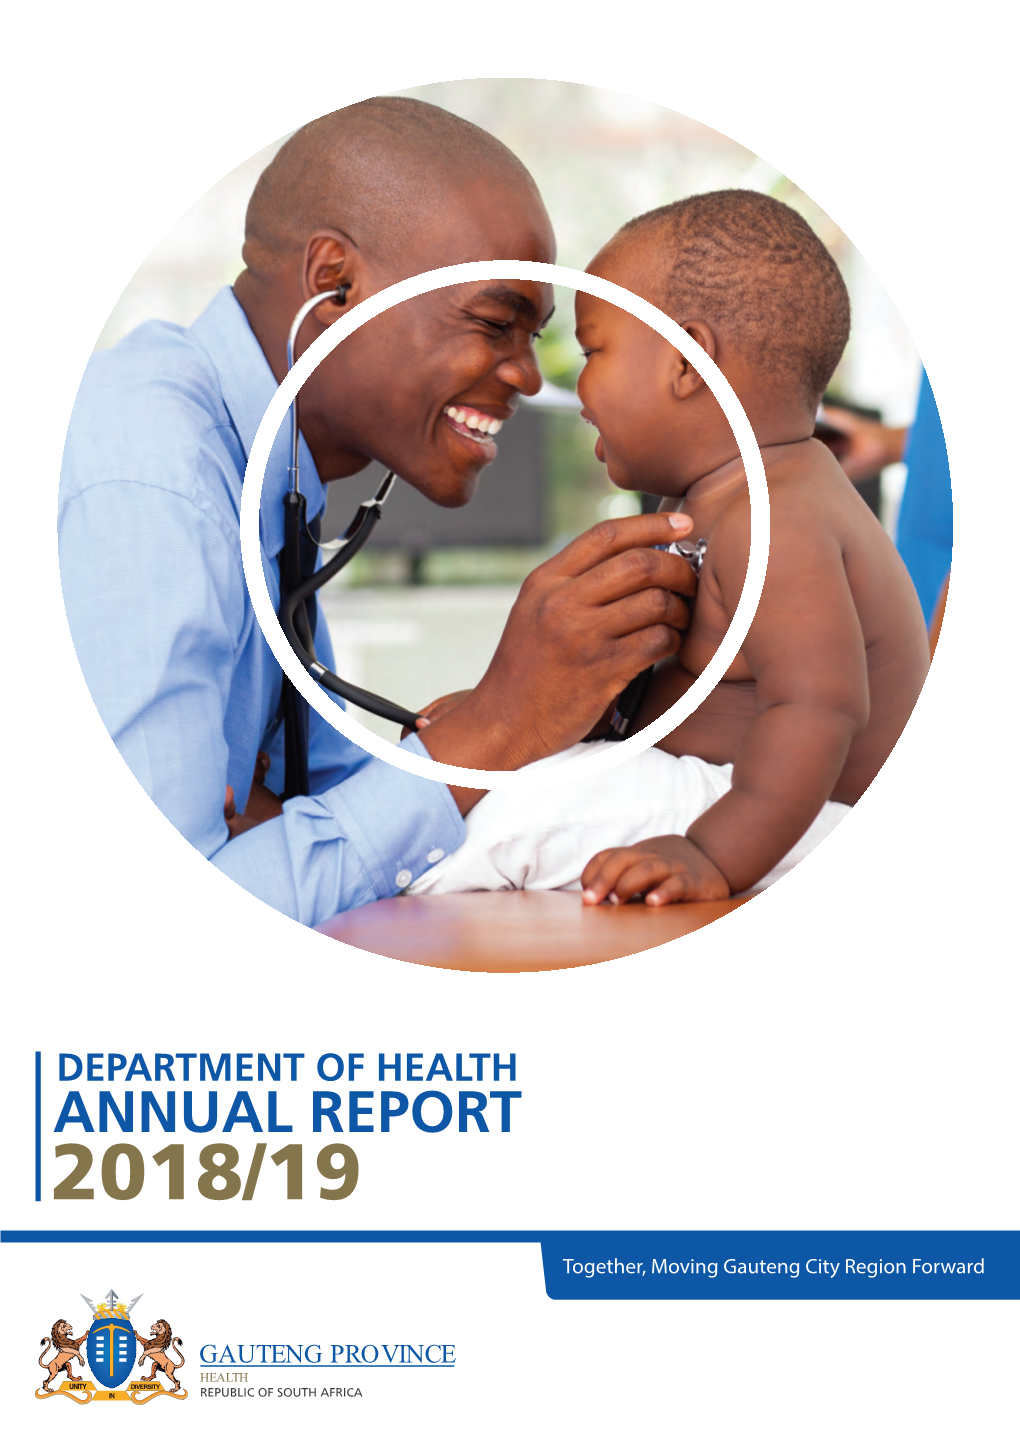 Department of Health Annual Report 2018/19